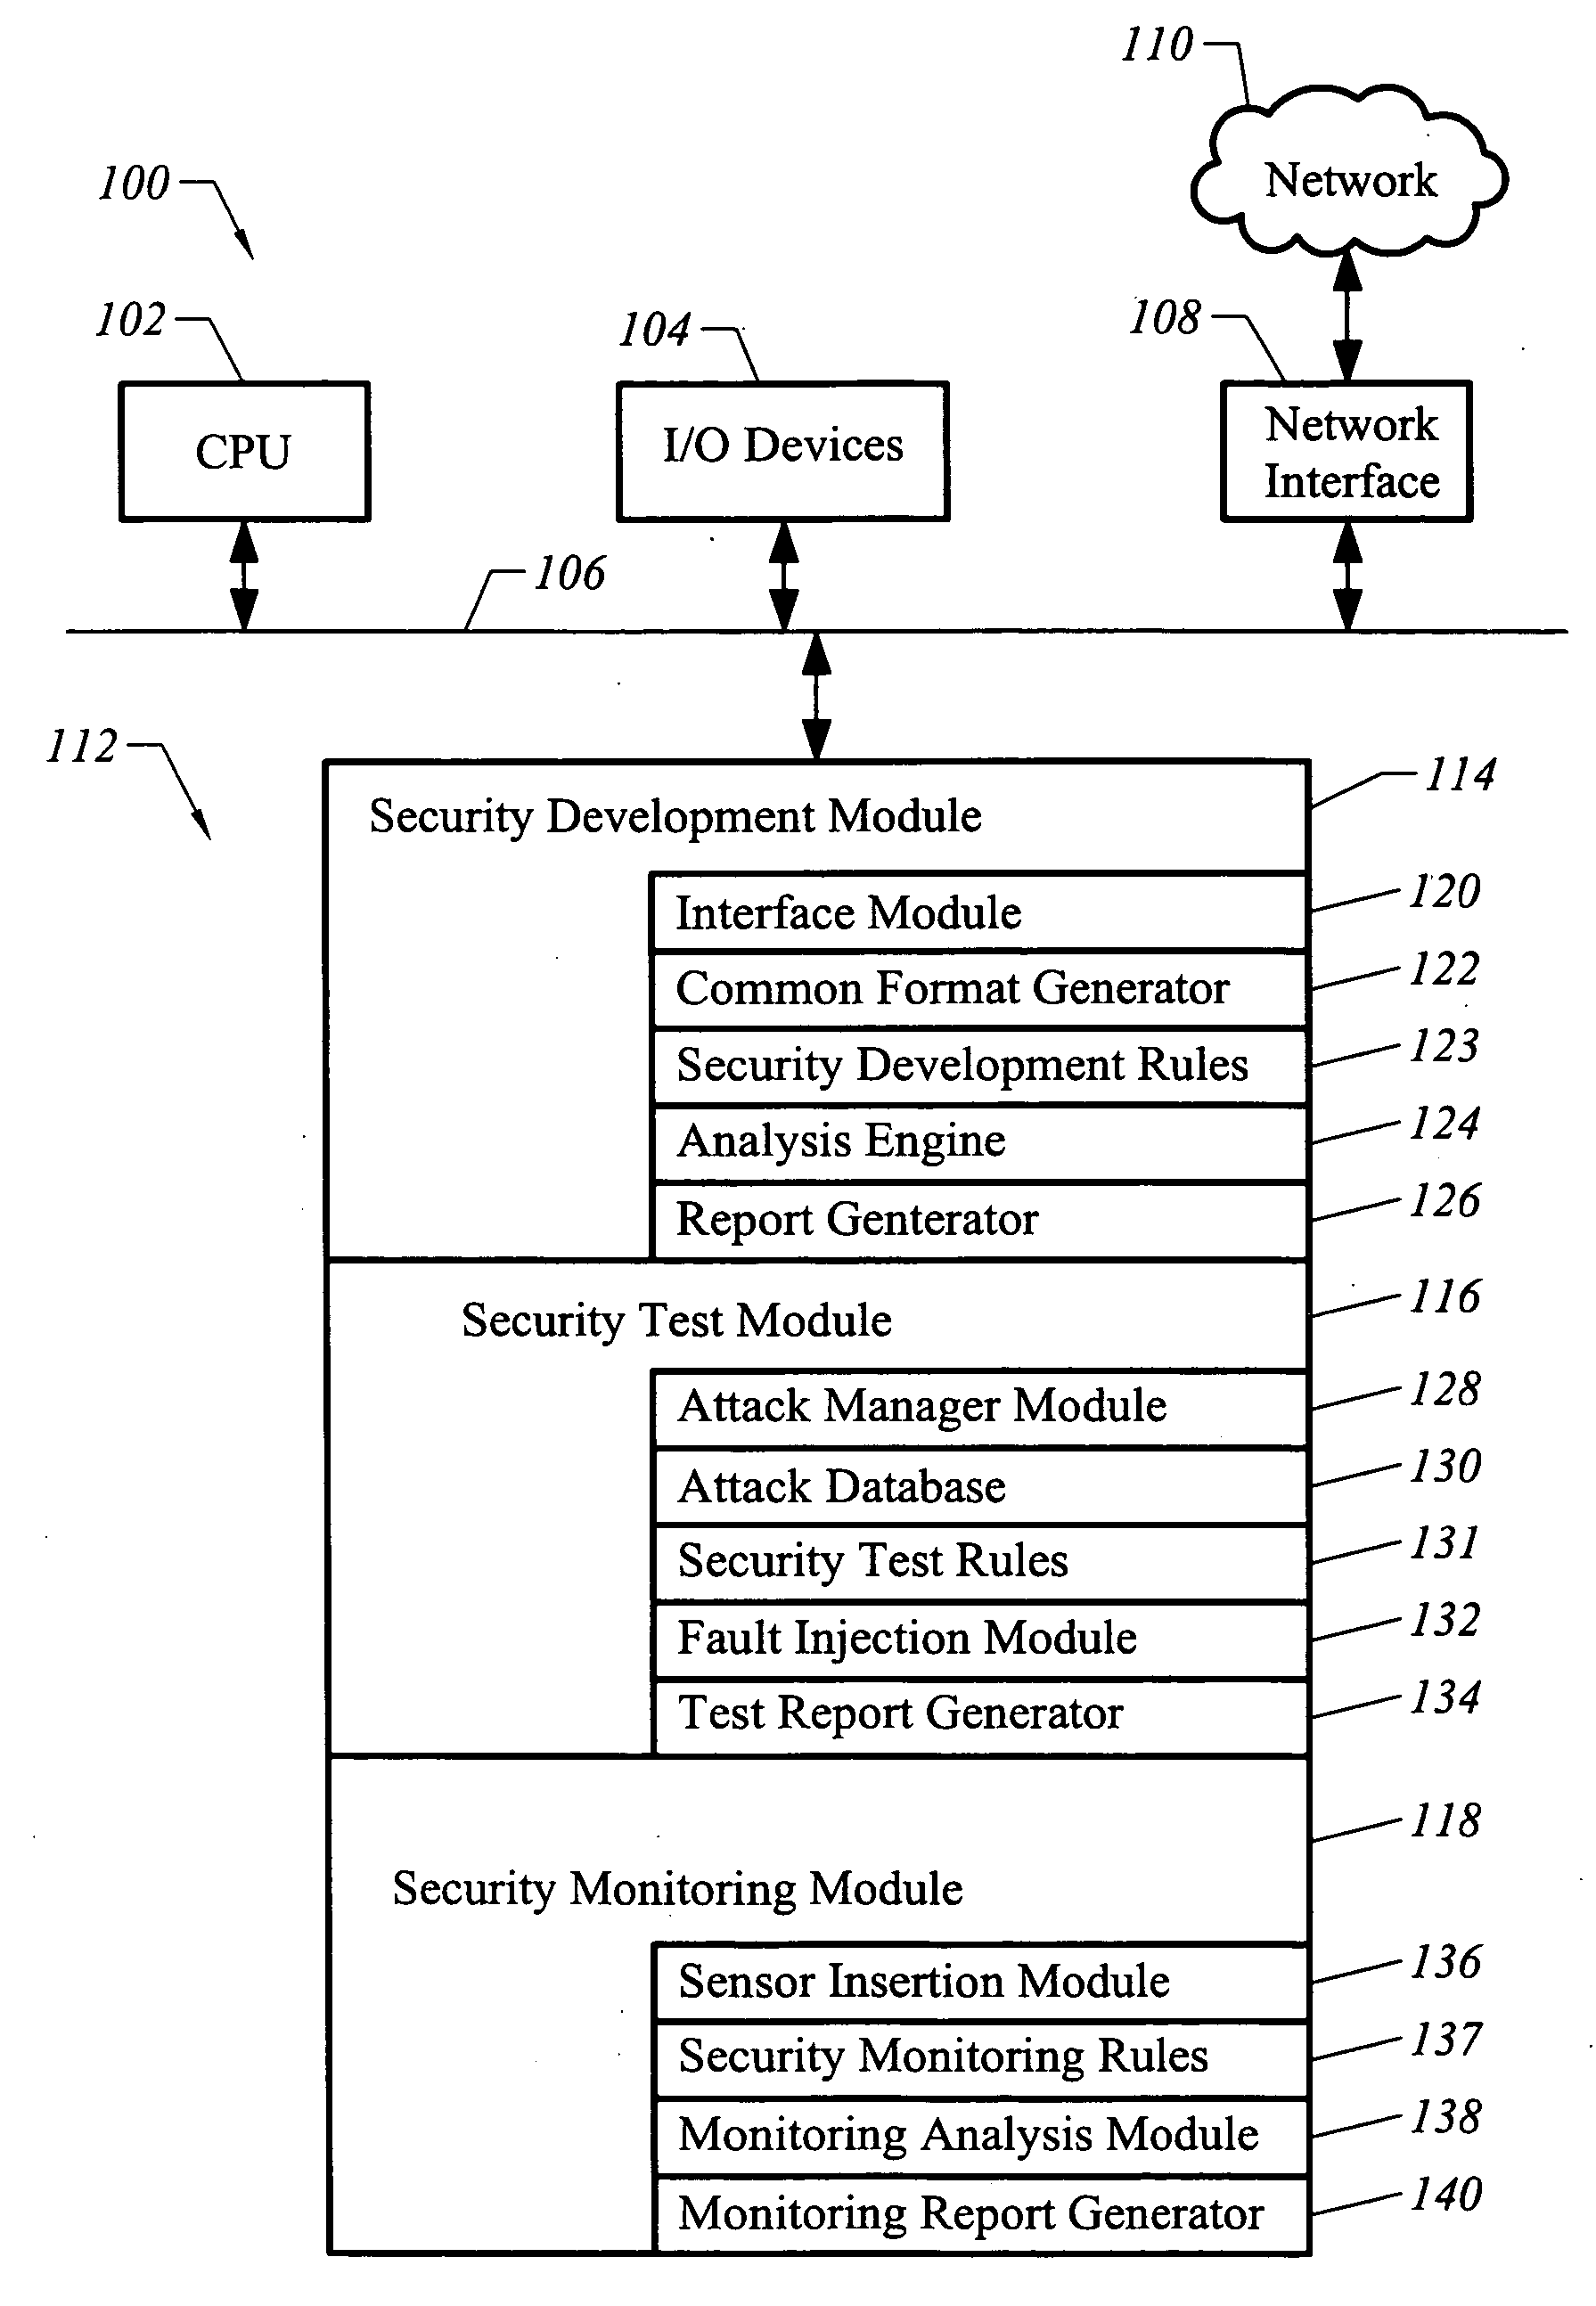 Apparatus and method for developing, testing and monitoring secure software